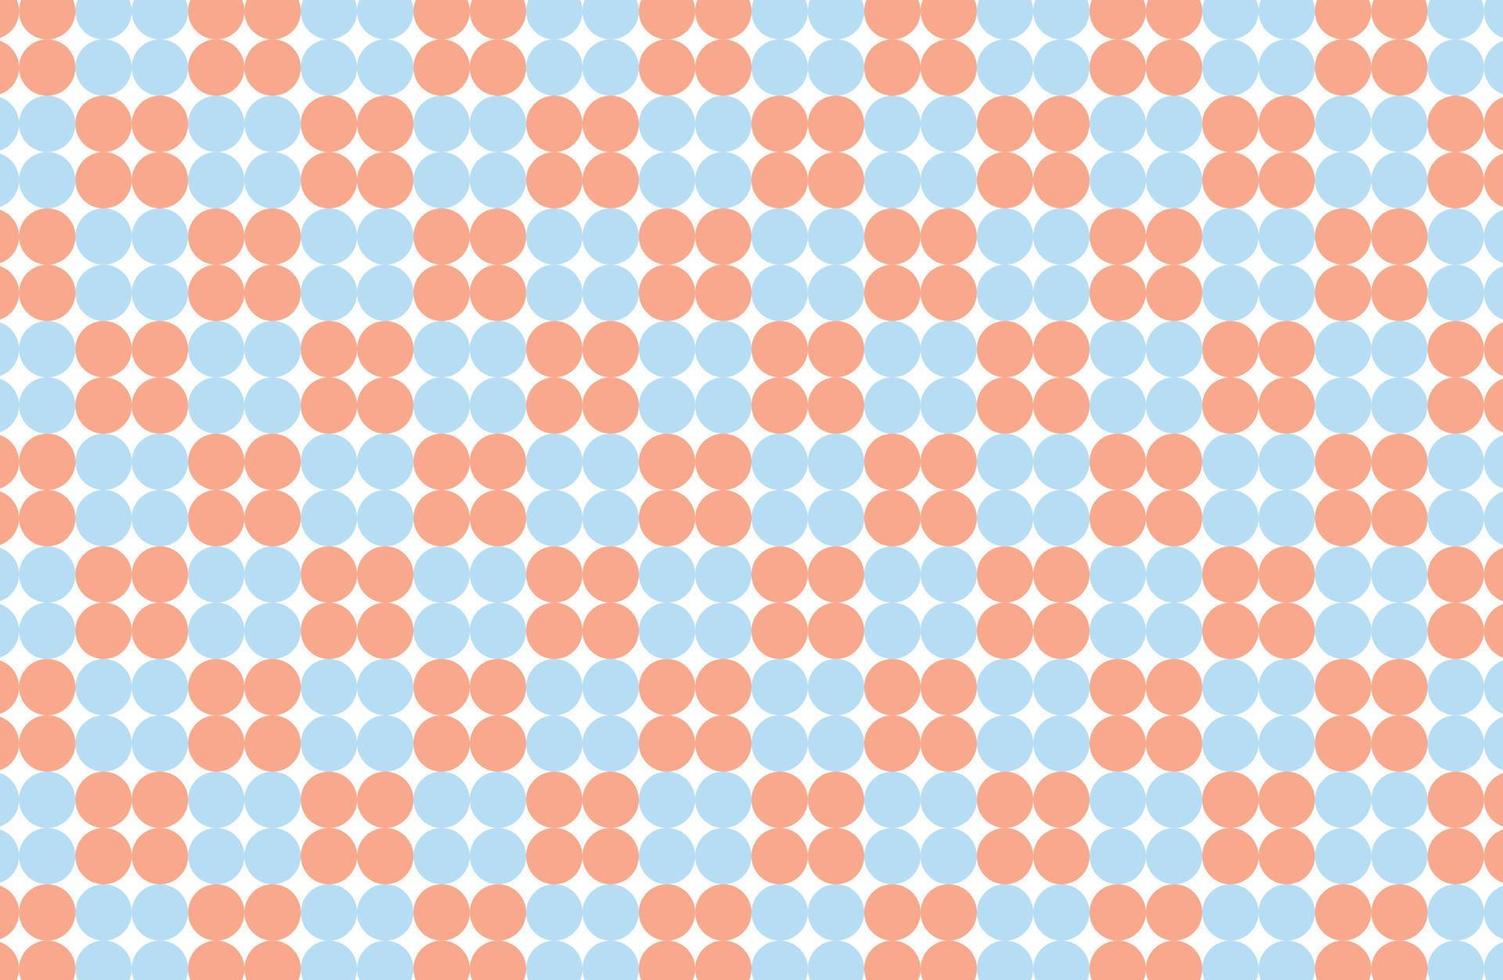 Abstract polkadot pastel color background, it is patterns. vector